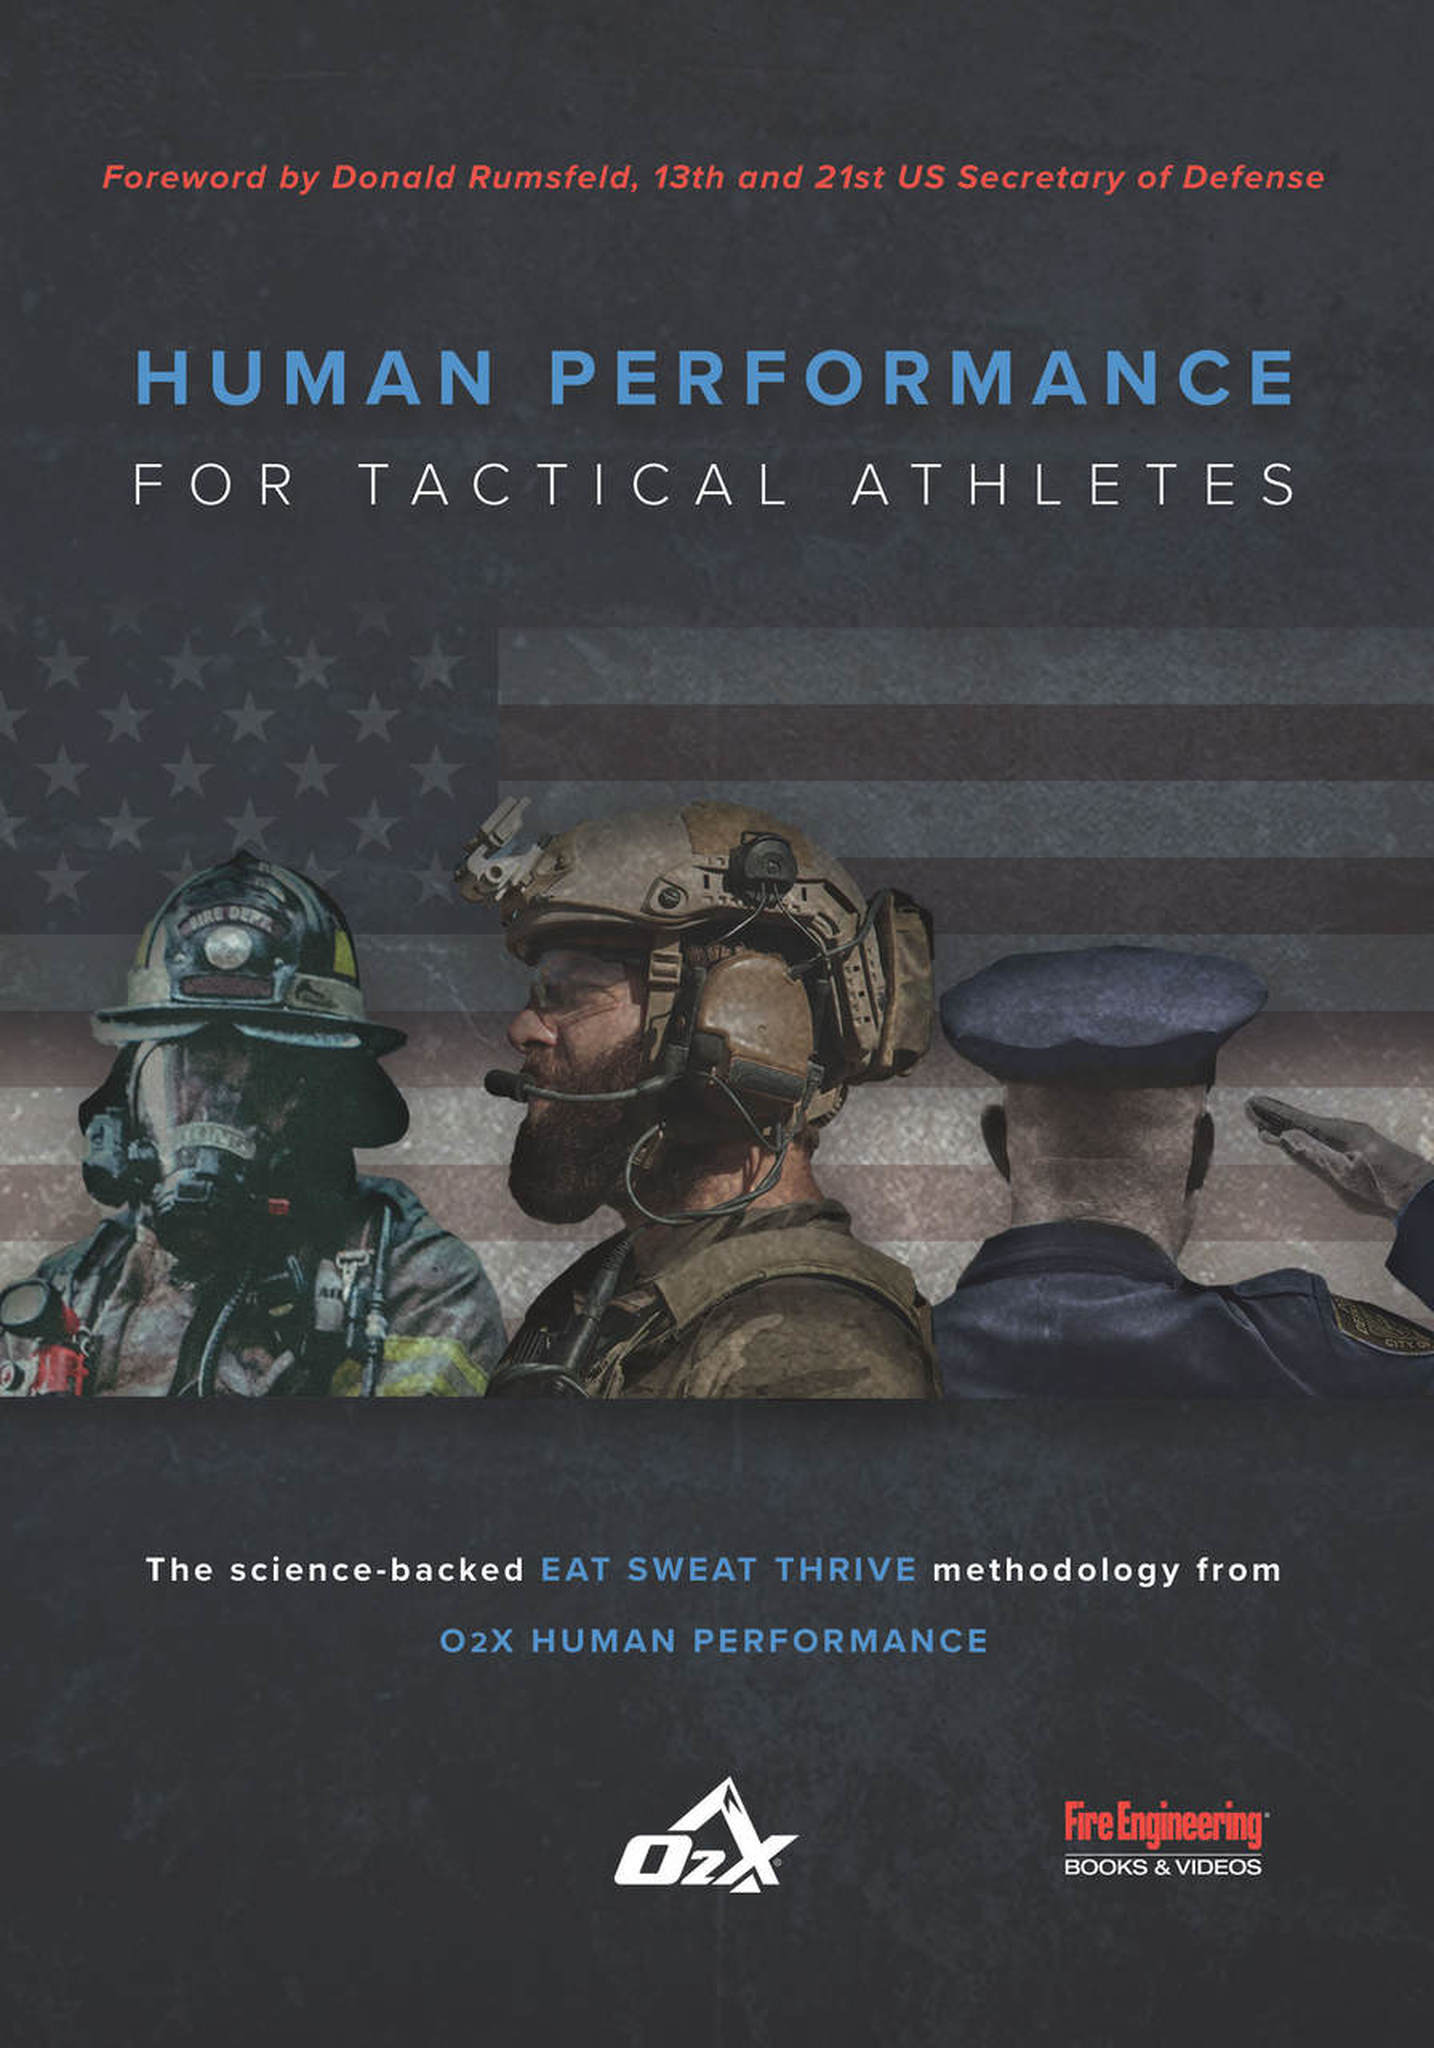 Fire Engineering: Human Performance for Tactical Athletes